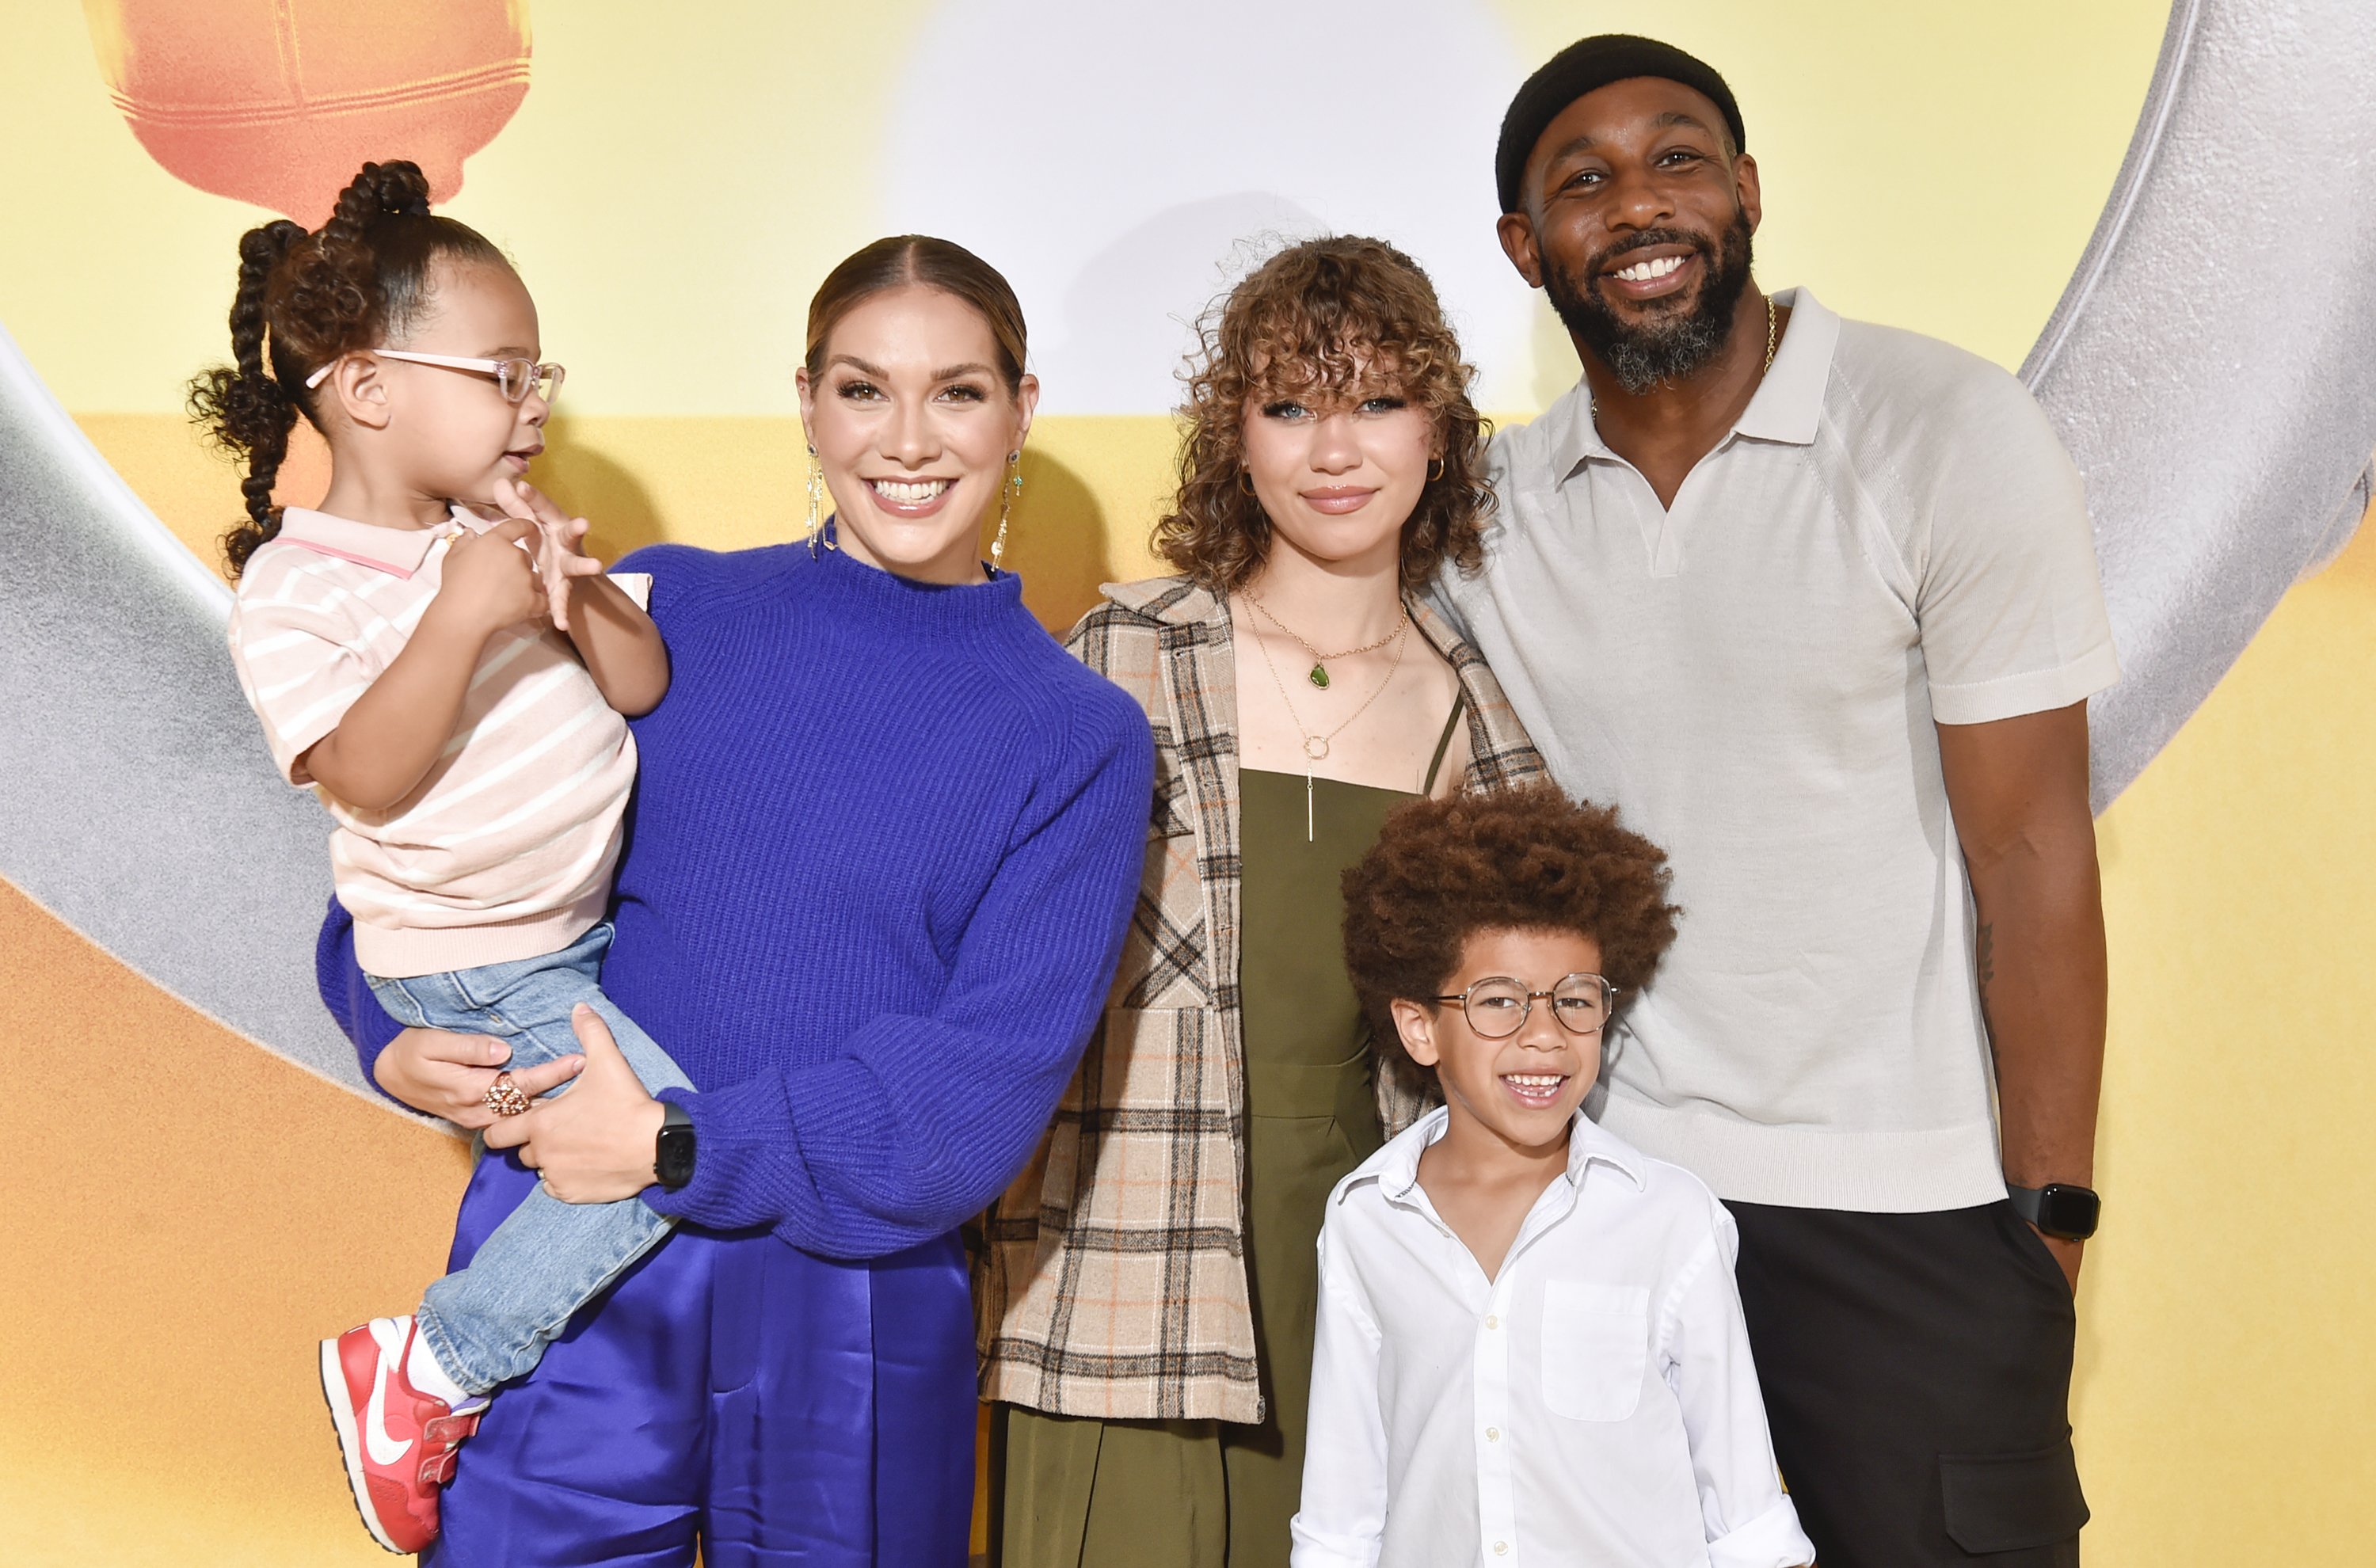 Zaia Boss, Allison Holker, Weslie Fowler, Maddox Laurel Boss, and Stephen "tWitch" Boss at the "Minions: The Rise of Gru" Los Angeles premiere on June 25, 2022, in Hollywood, California | Source: Getty Images